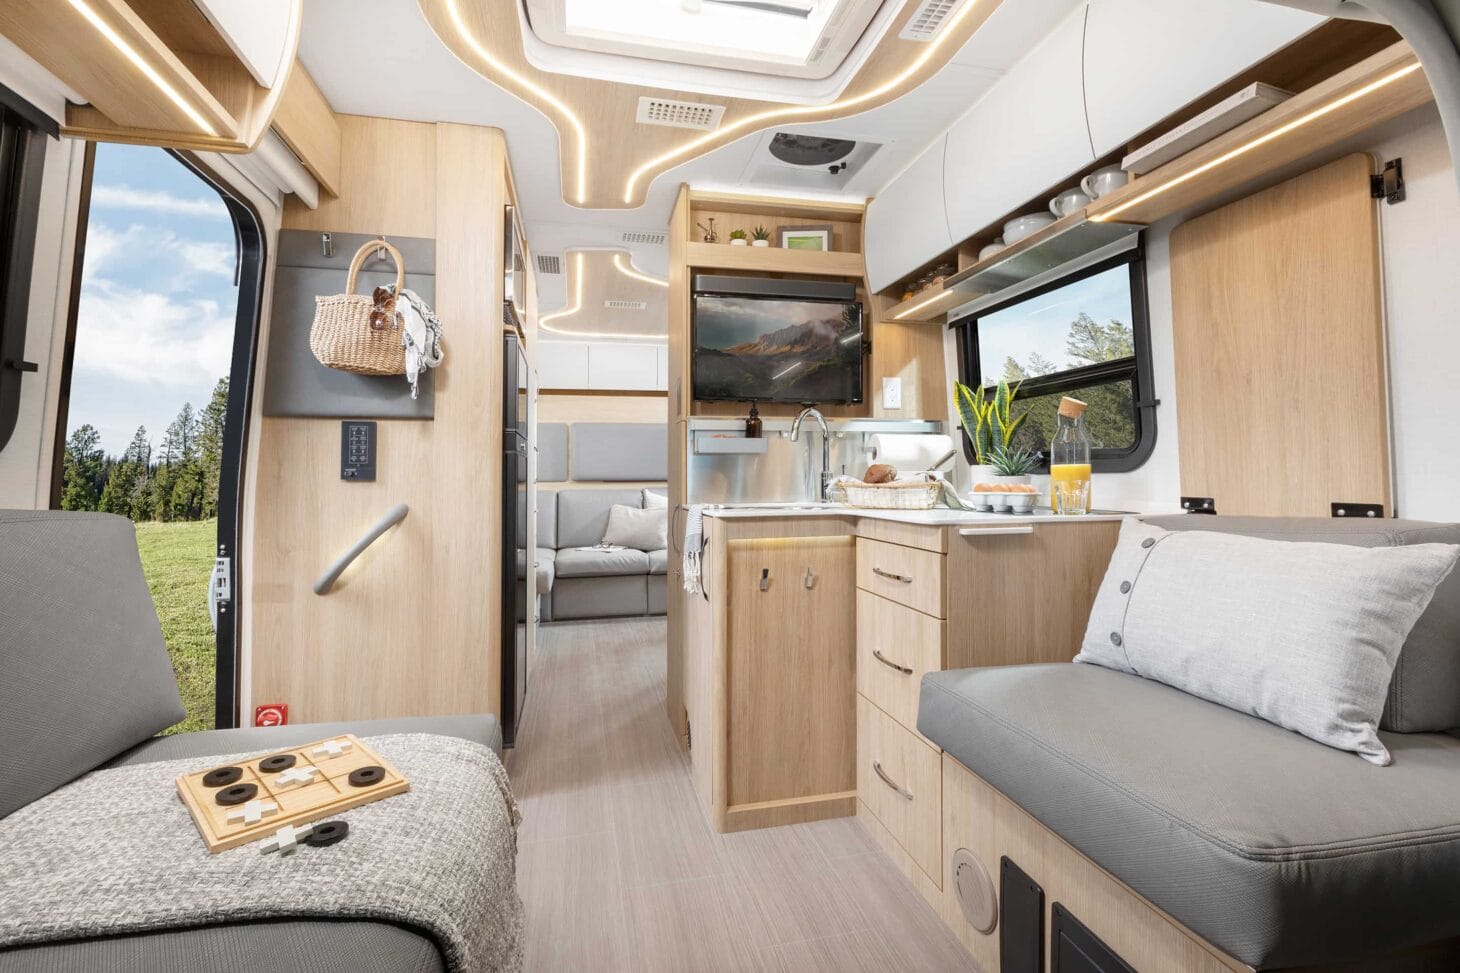 Interior seating and kitchen area of a Class B+ RV